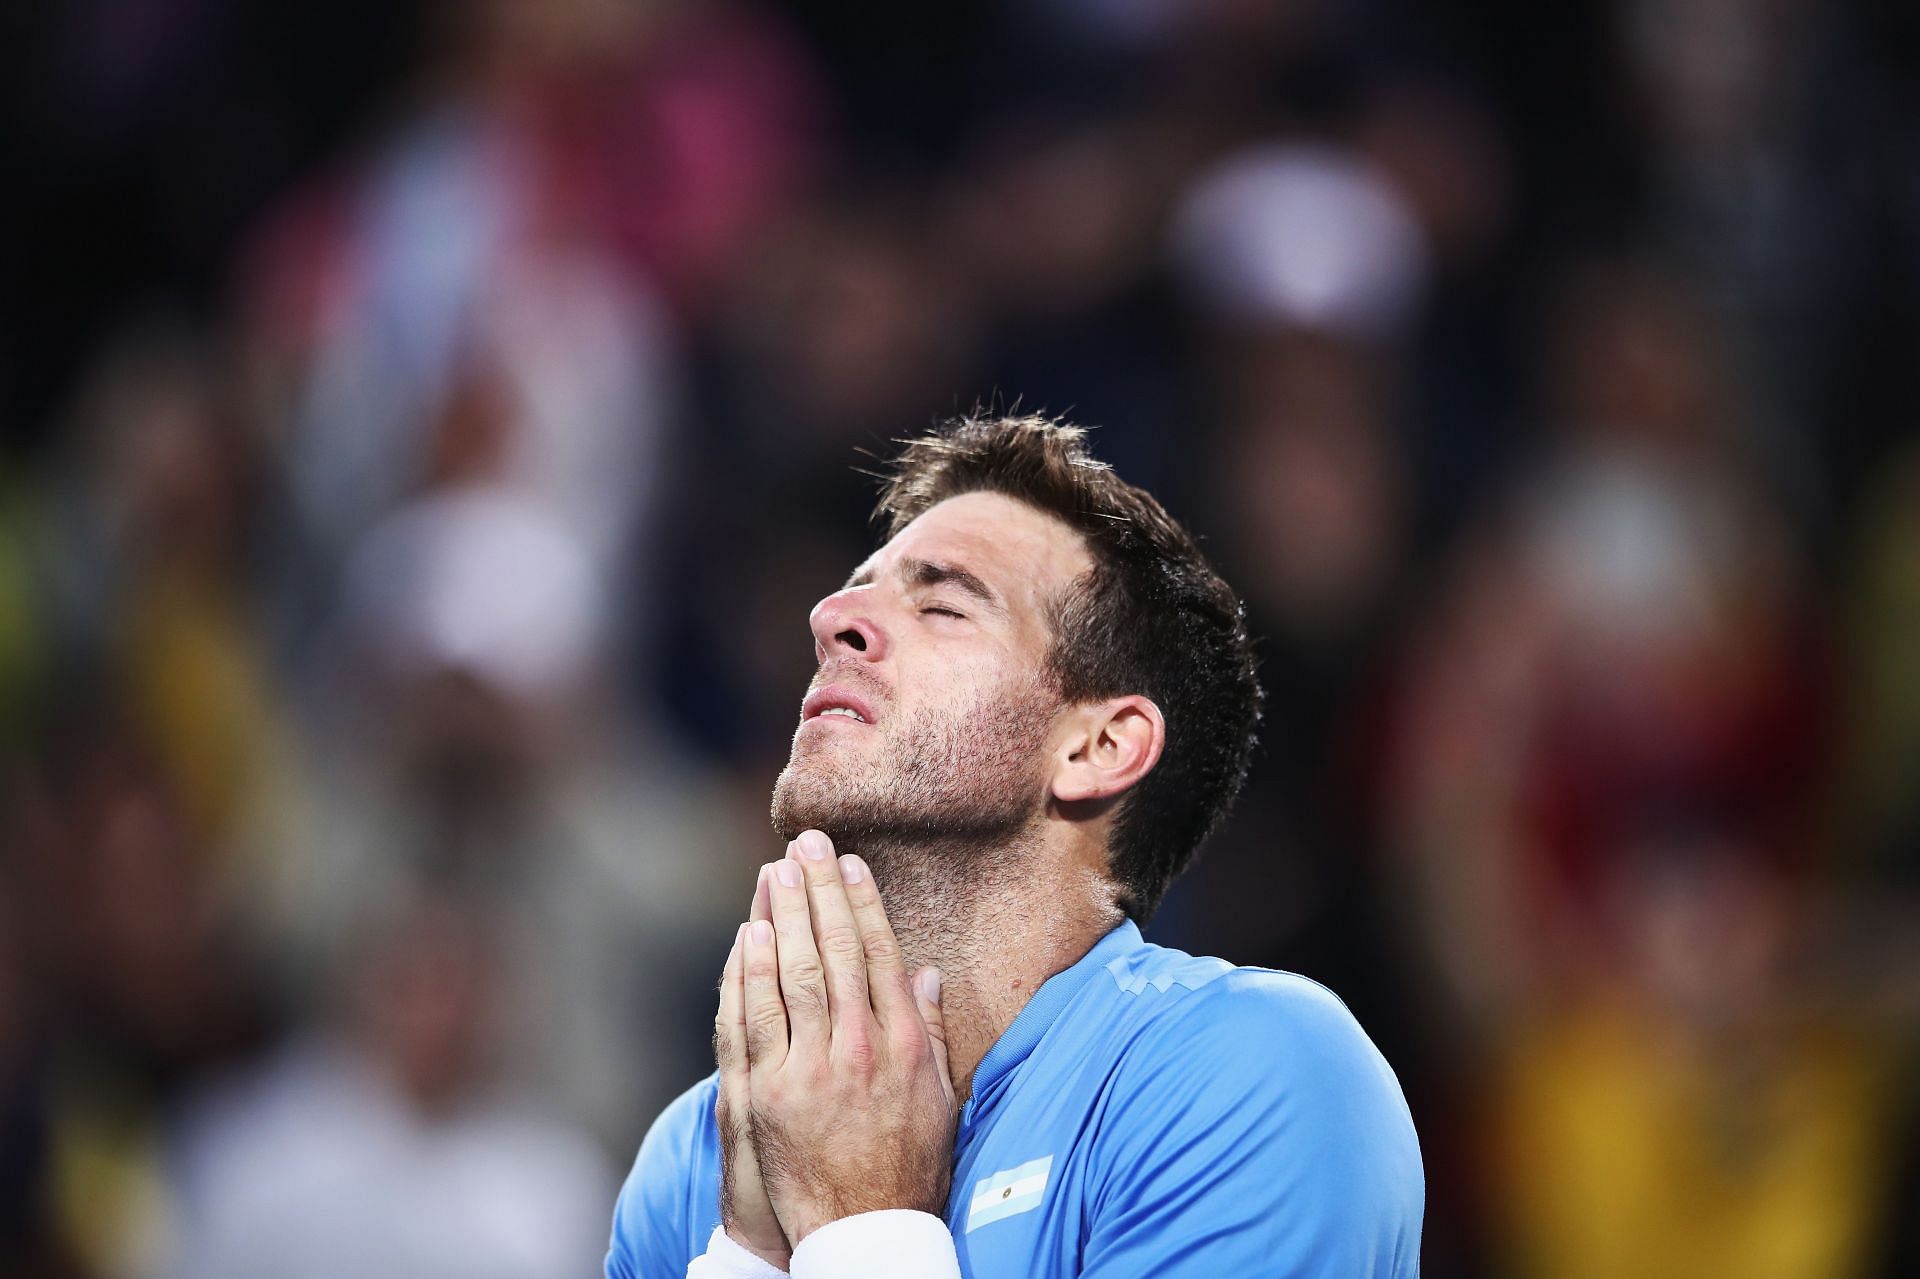 Service numbers will be key for Juan Martin del Potro.